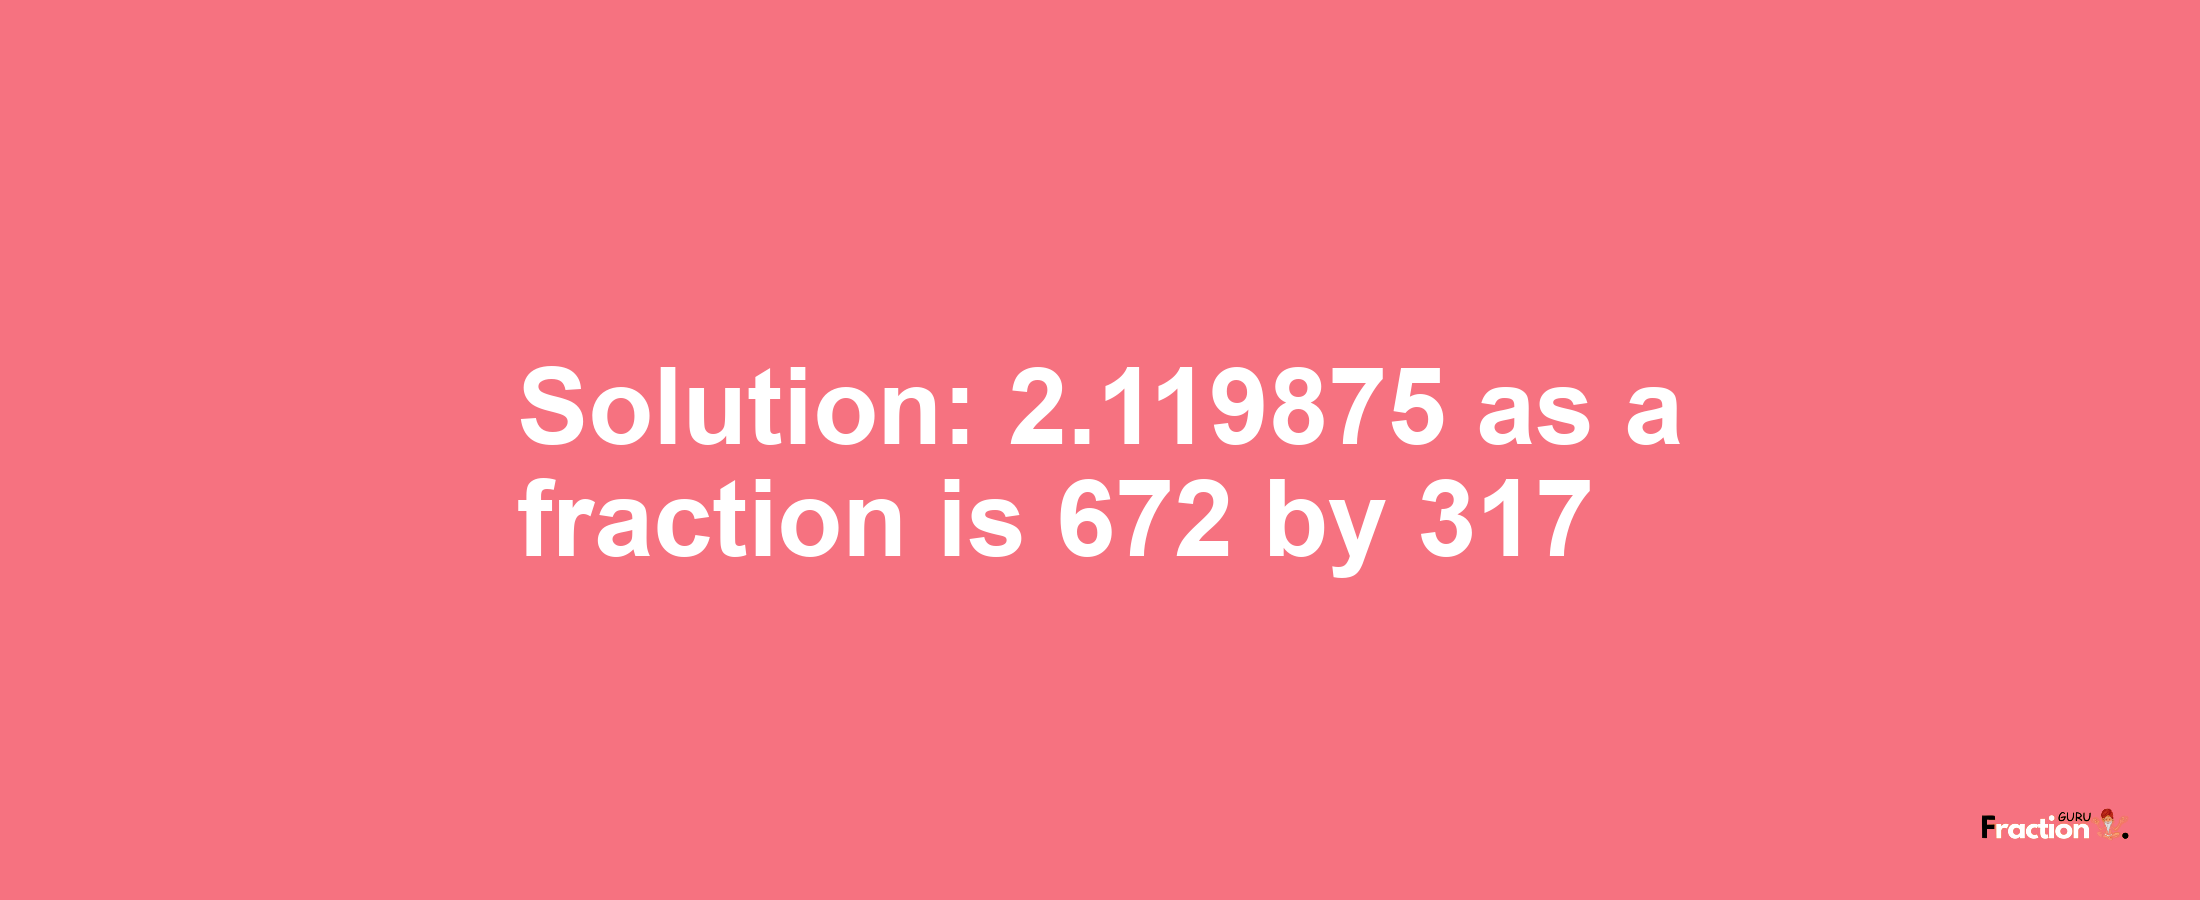 Solution:2.119875 as a fraction is 672/317